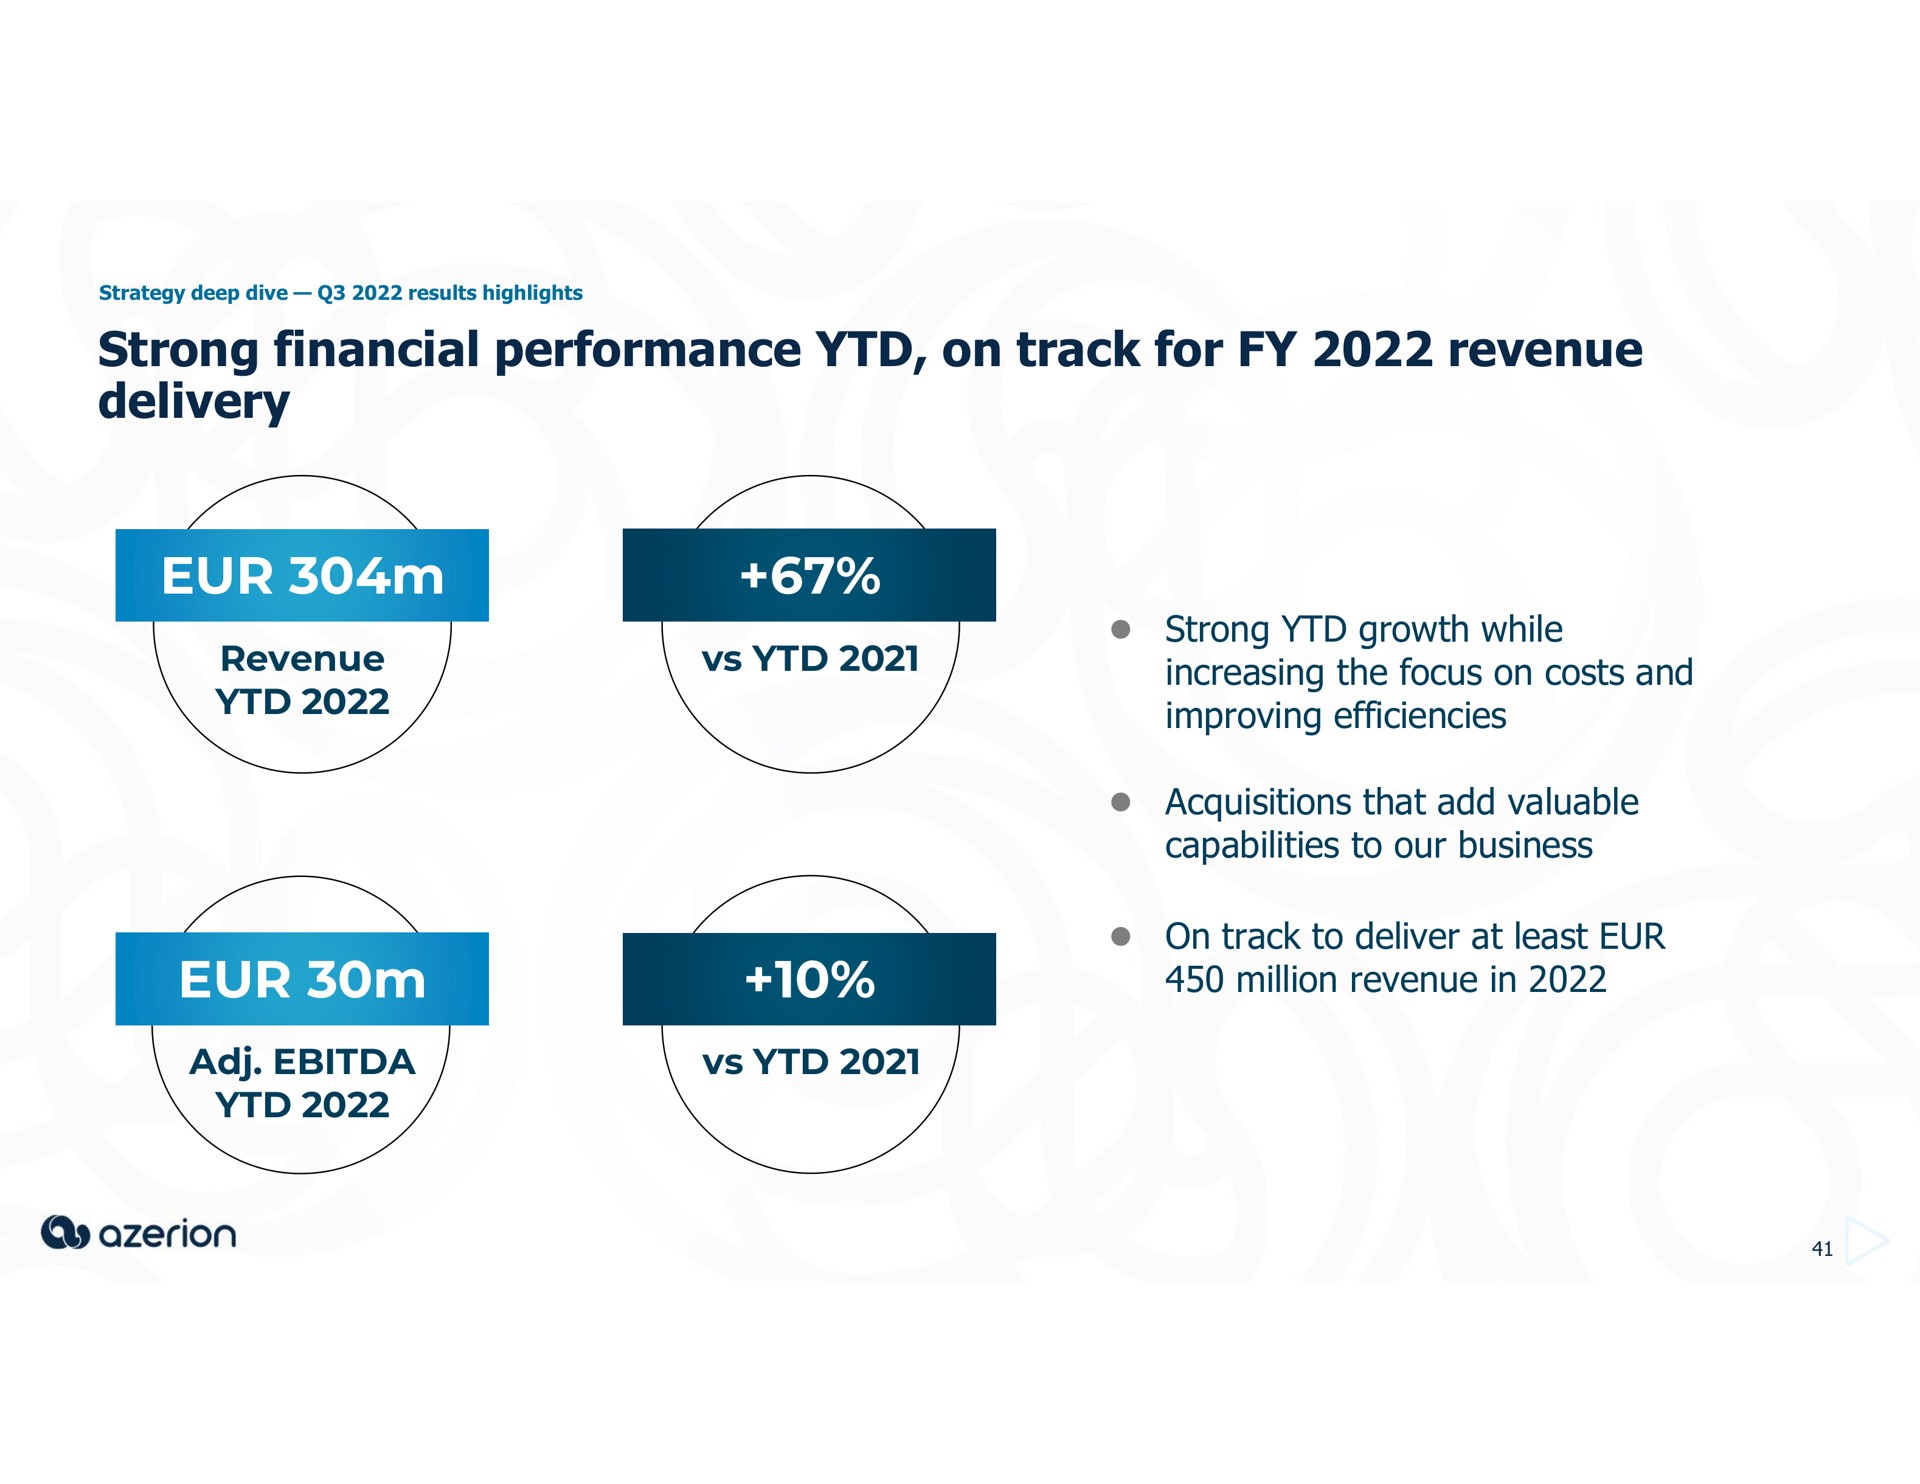 strong financial performance on track for revenue delivery revenue strong growth while increasing the focus on costs and improving efficiencies acquisitions that add valuable capabilities to our business on track to deliver at least million revenue in i | Azerion